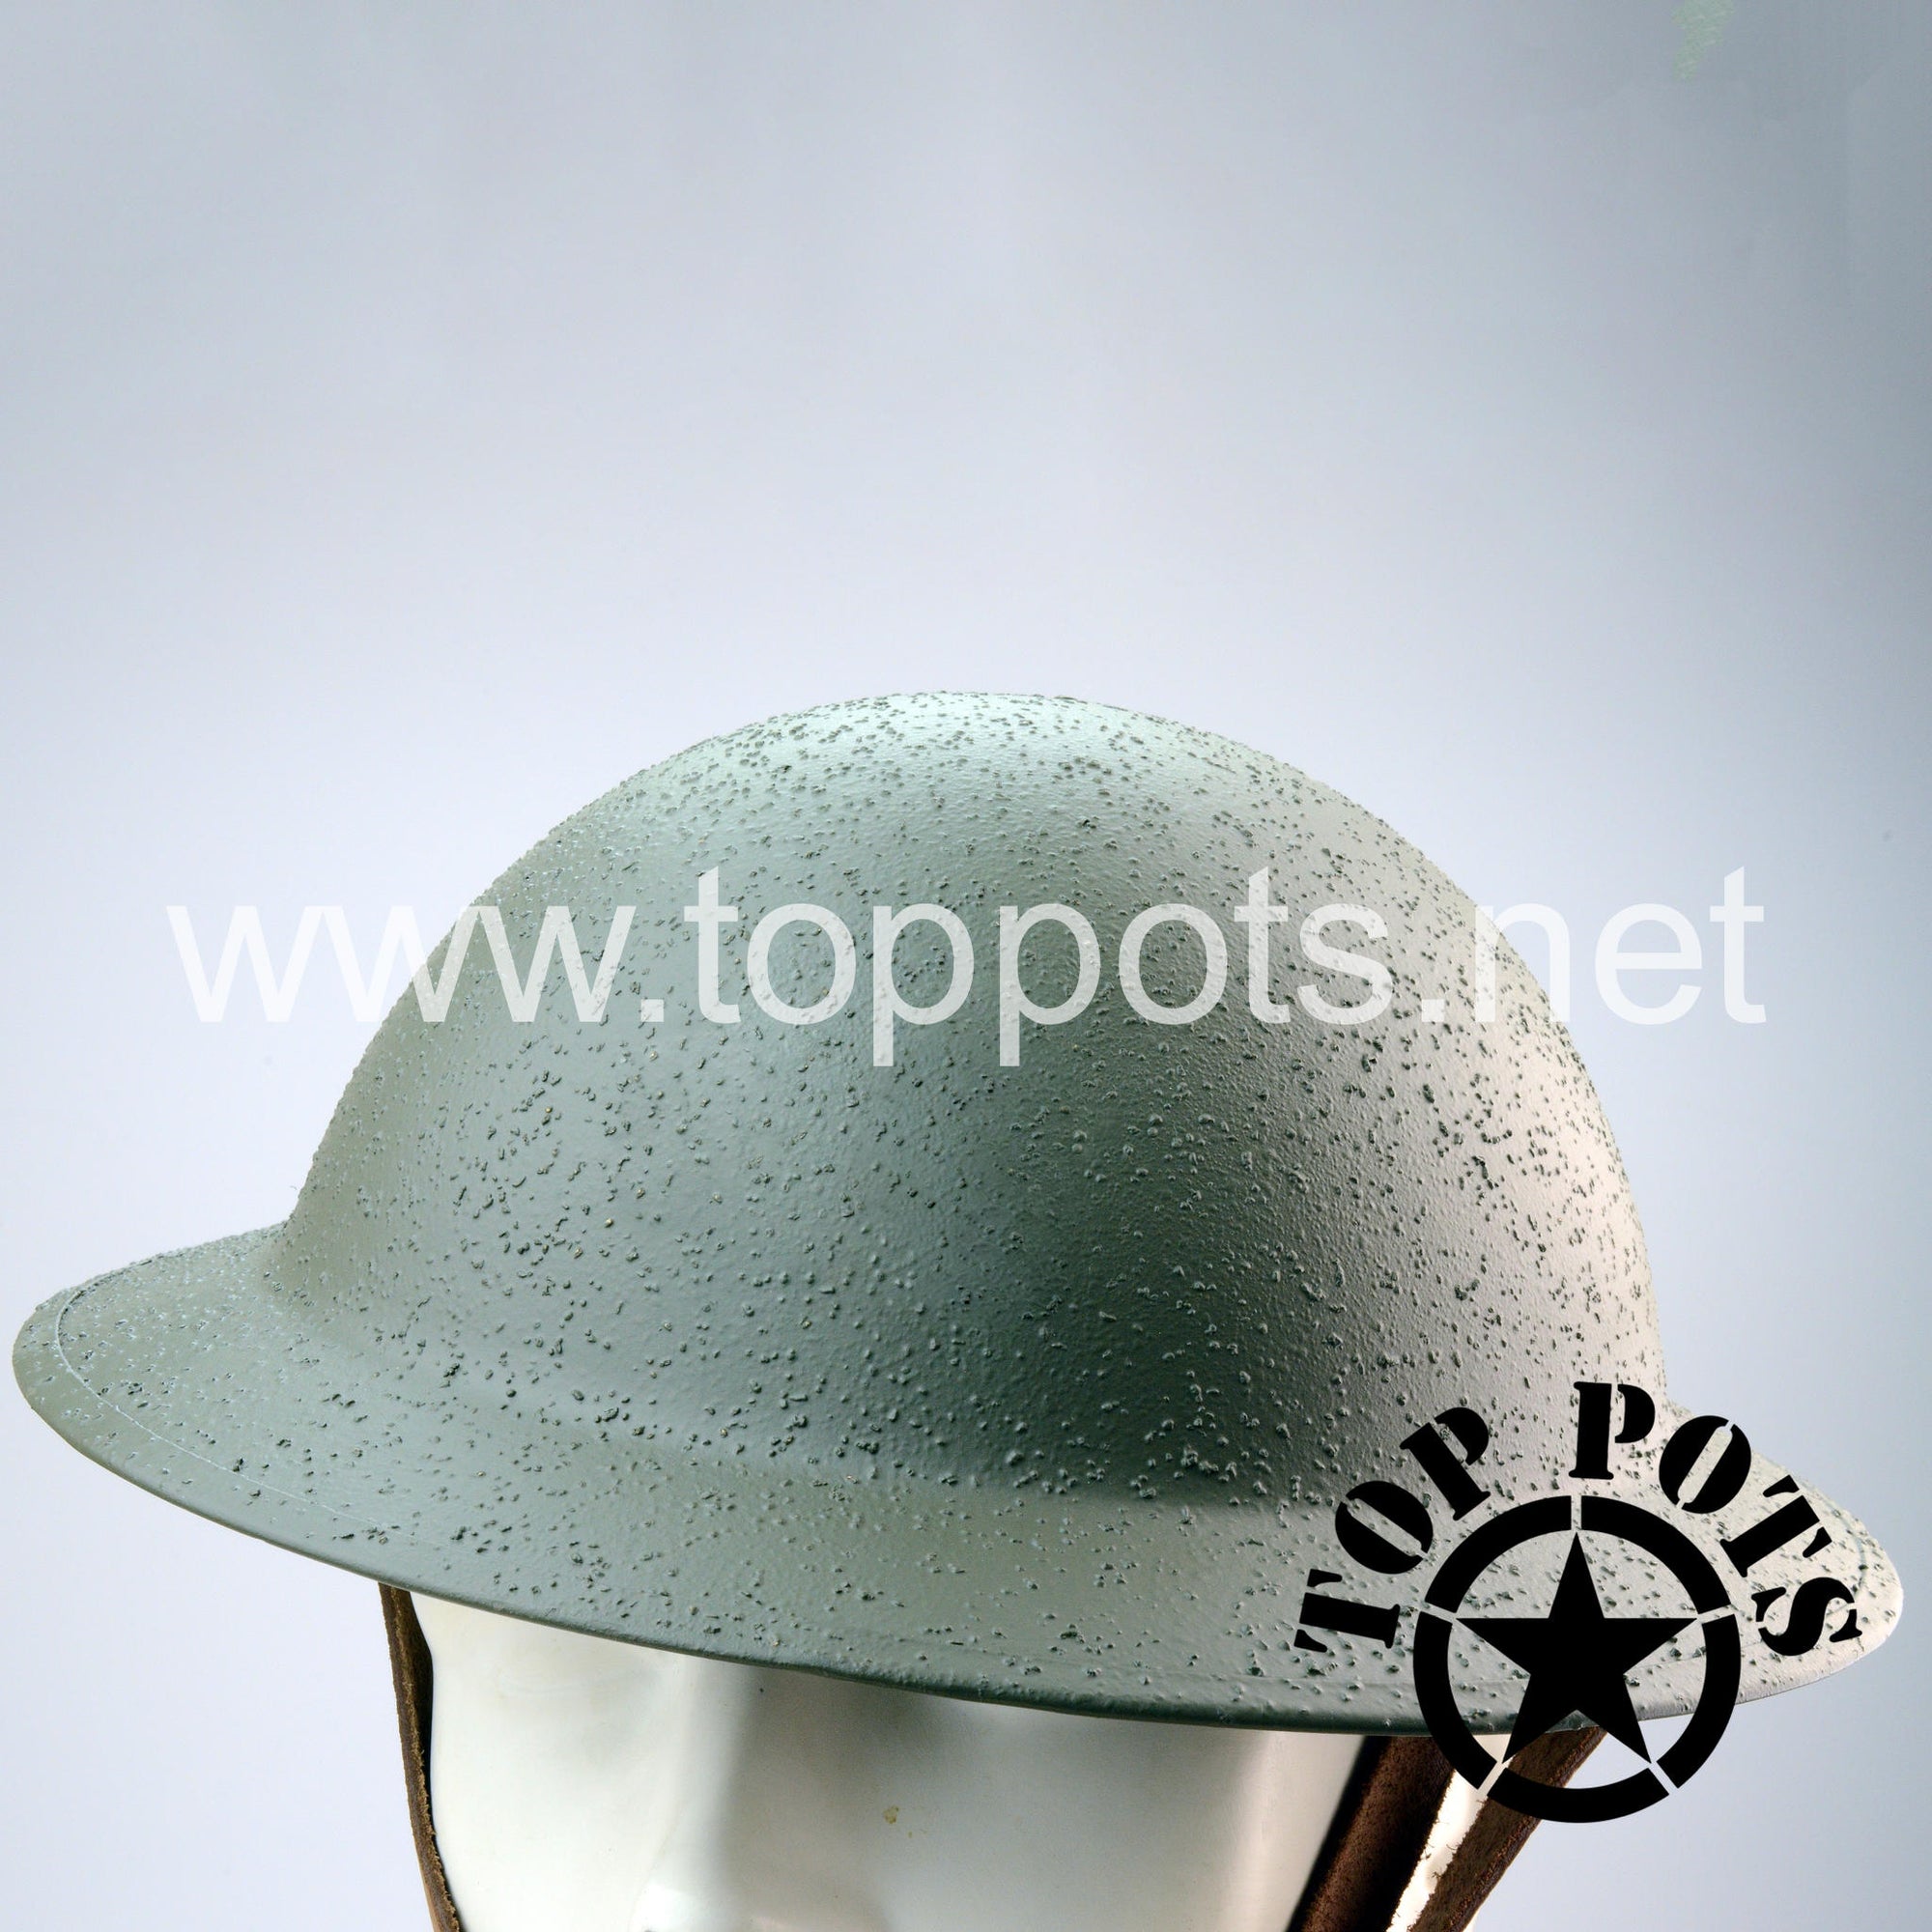 WWI US Army Reproduction American Doughboy M1917 Enlisted Brodie Helmet and Liner – Textured Finish